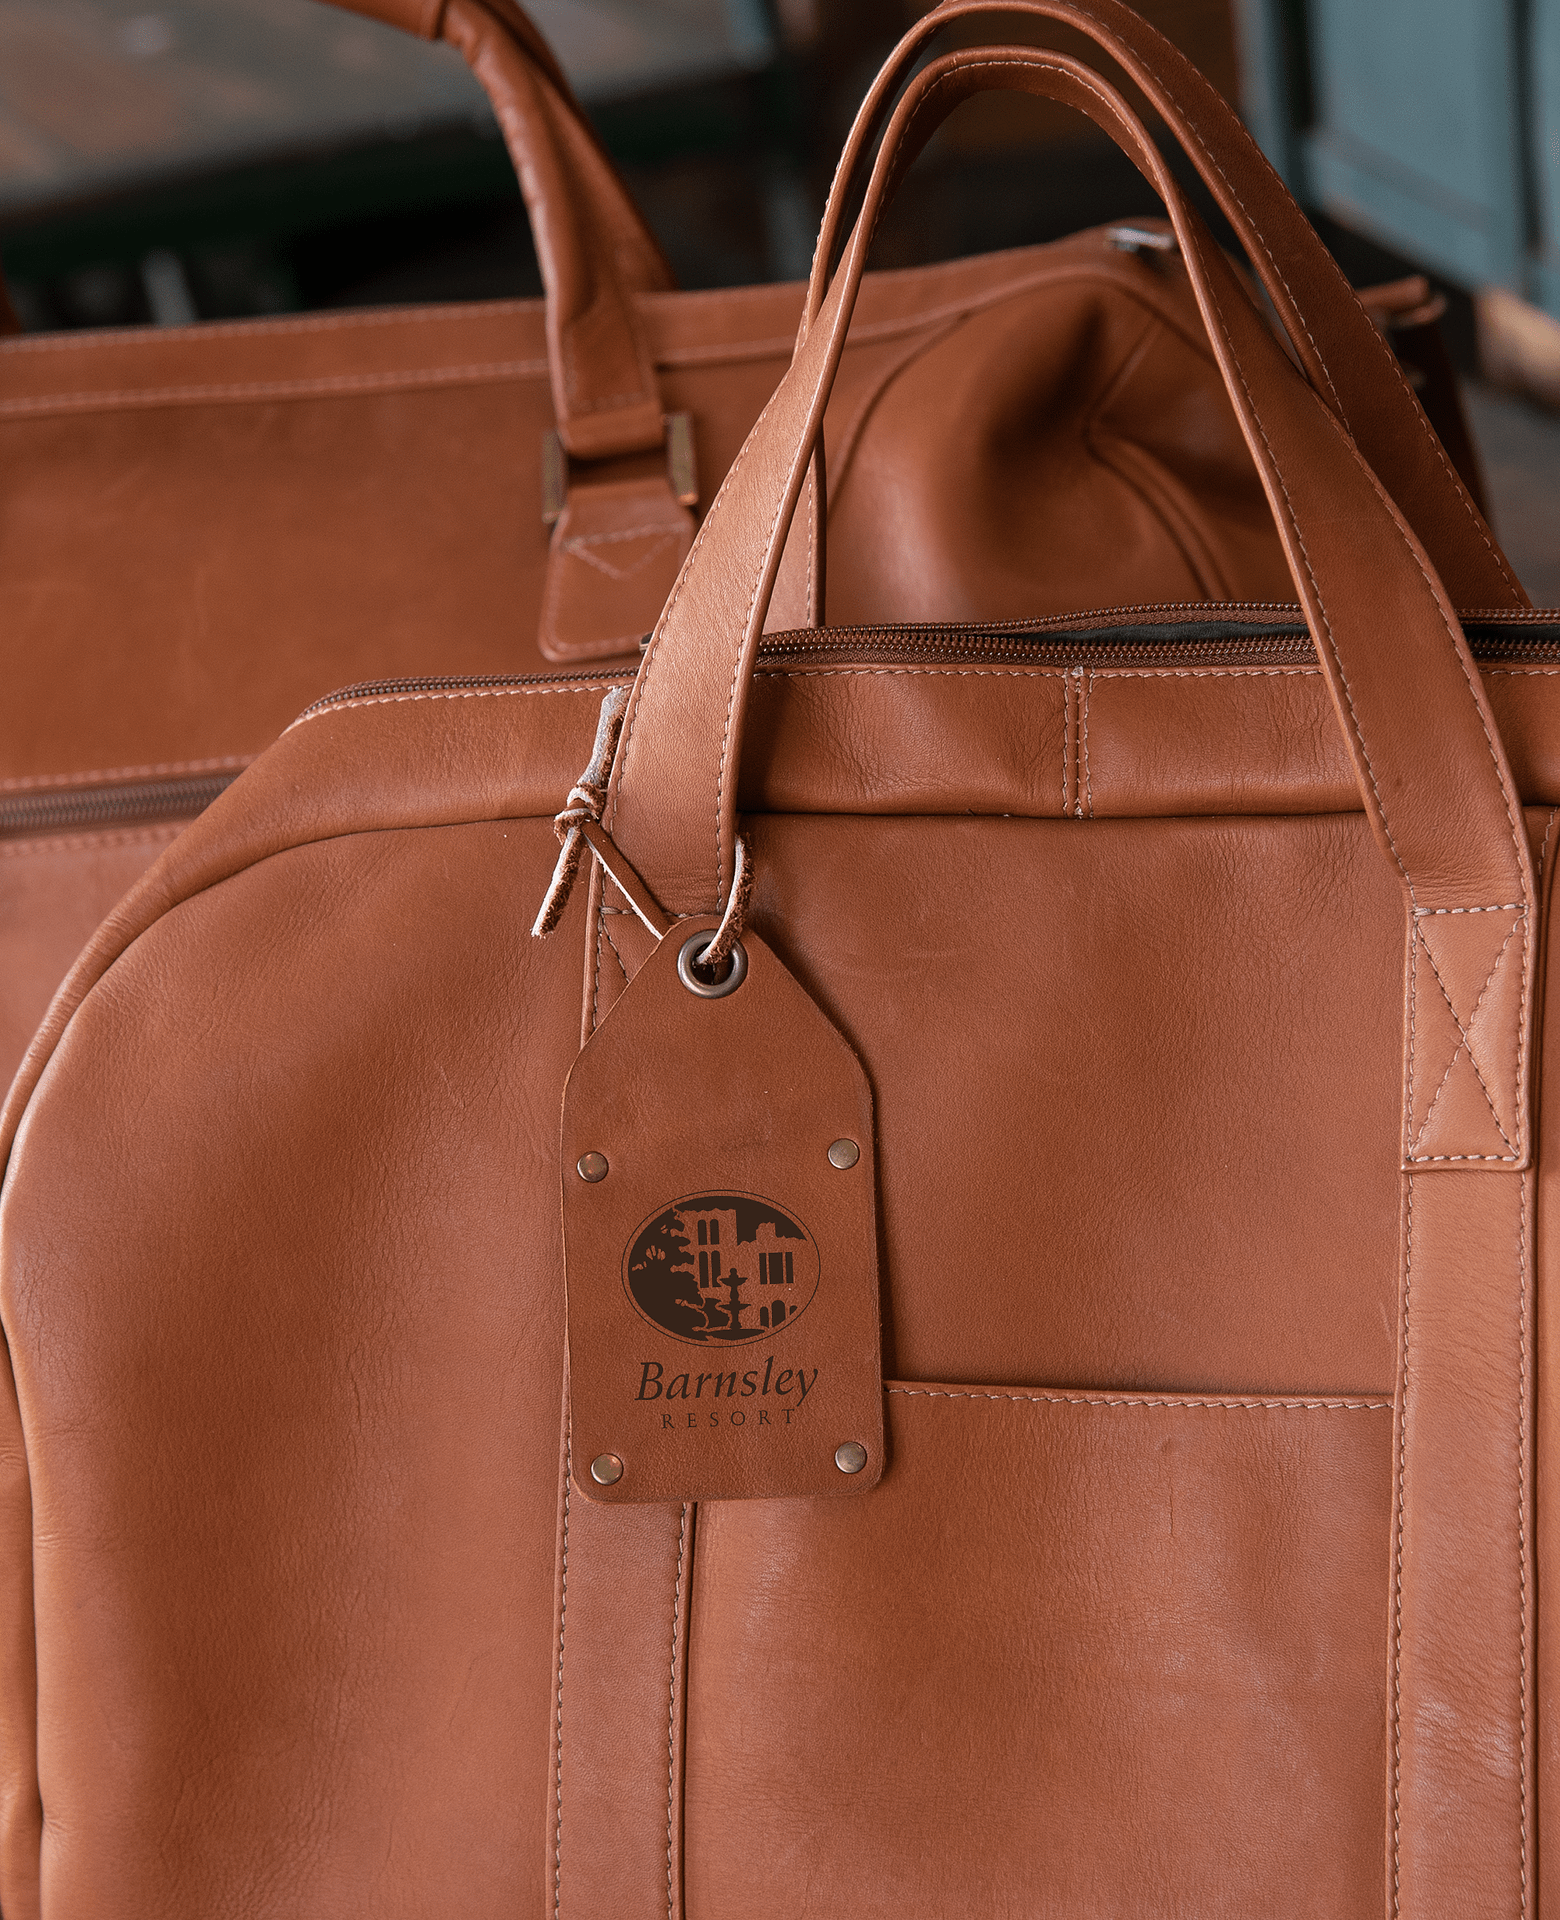 CAMINO | Small Weekender Leather Duffle Bag (SLC-203)